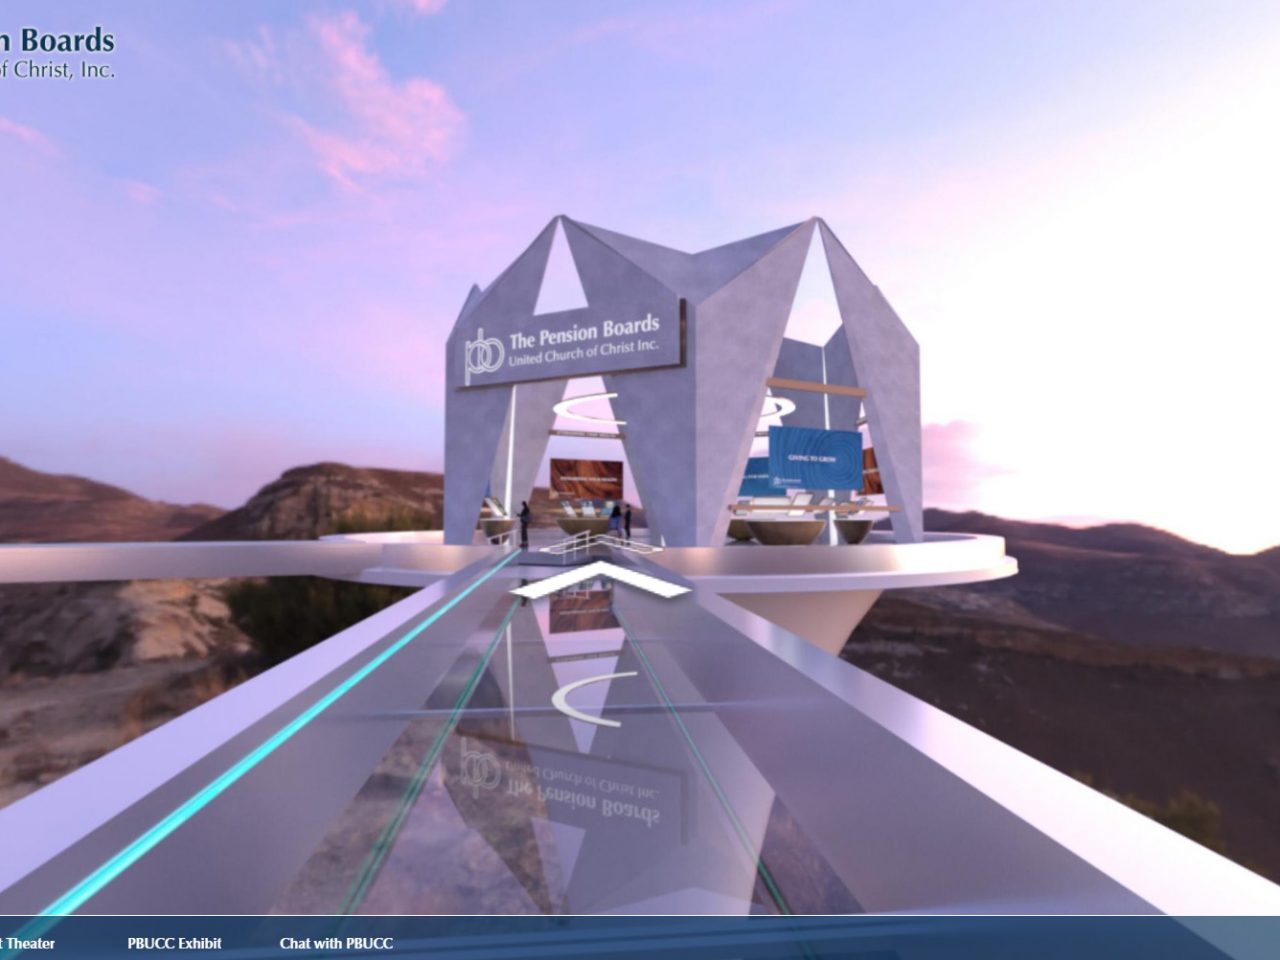 3D Immersive AR Virtual Event Environment for Pension Boards United Church of Chris